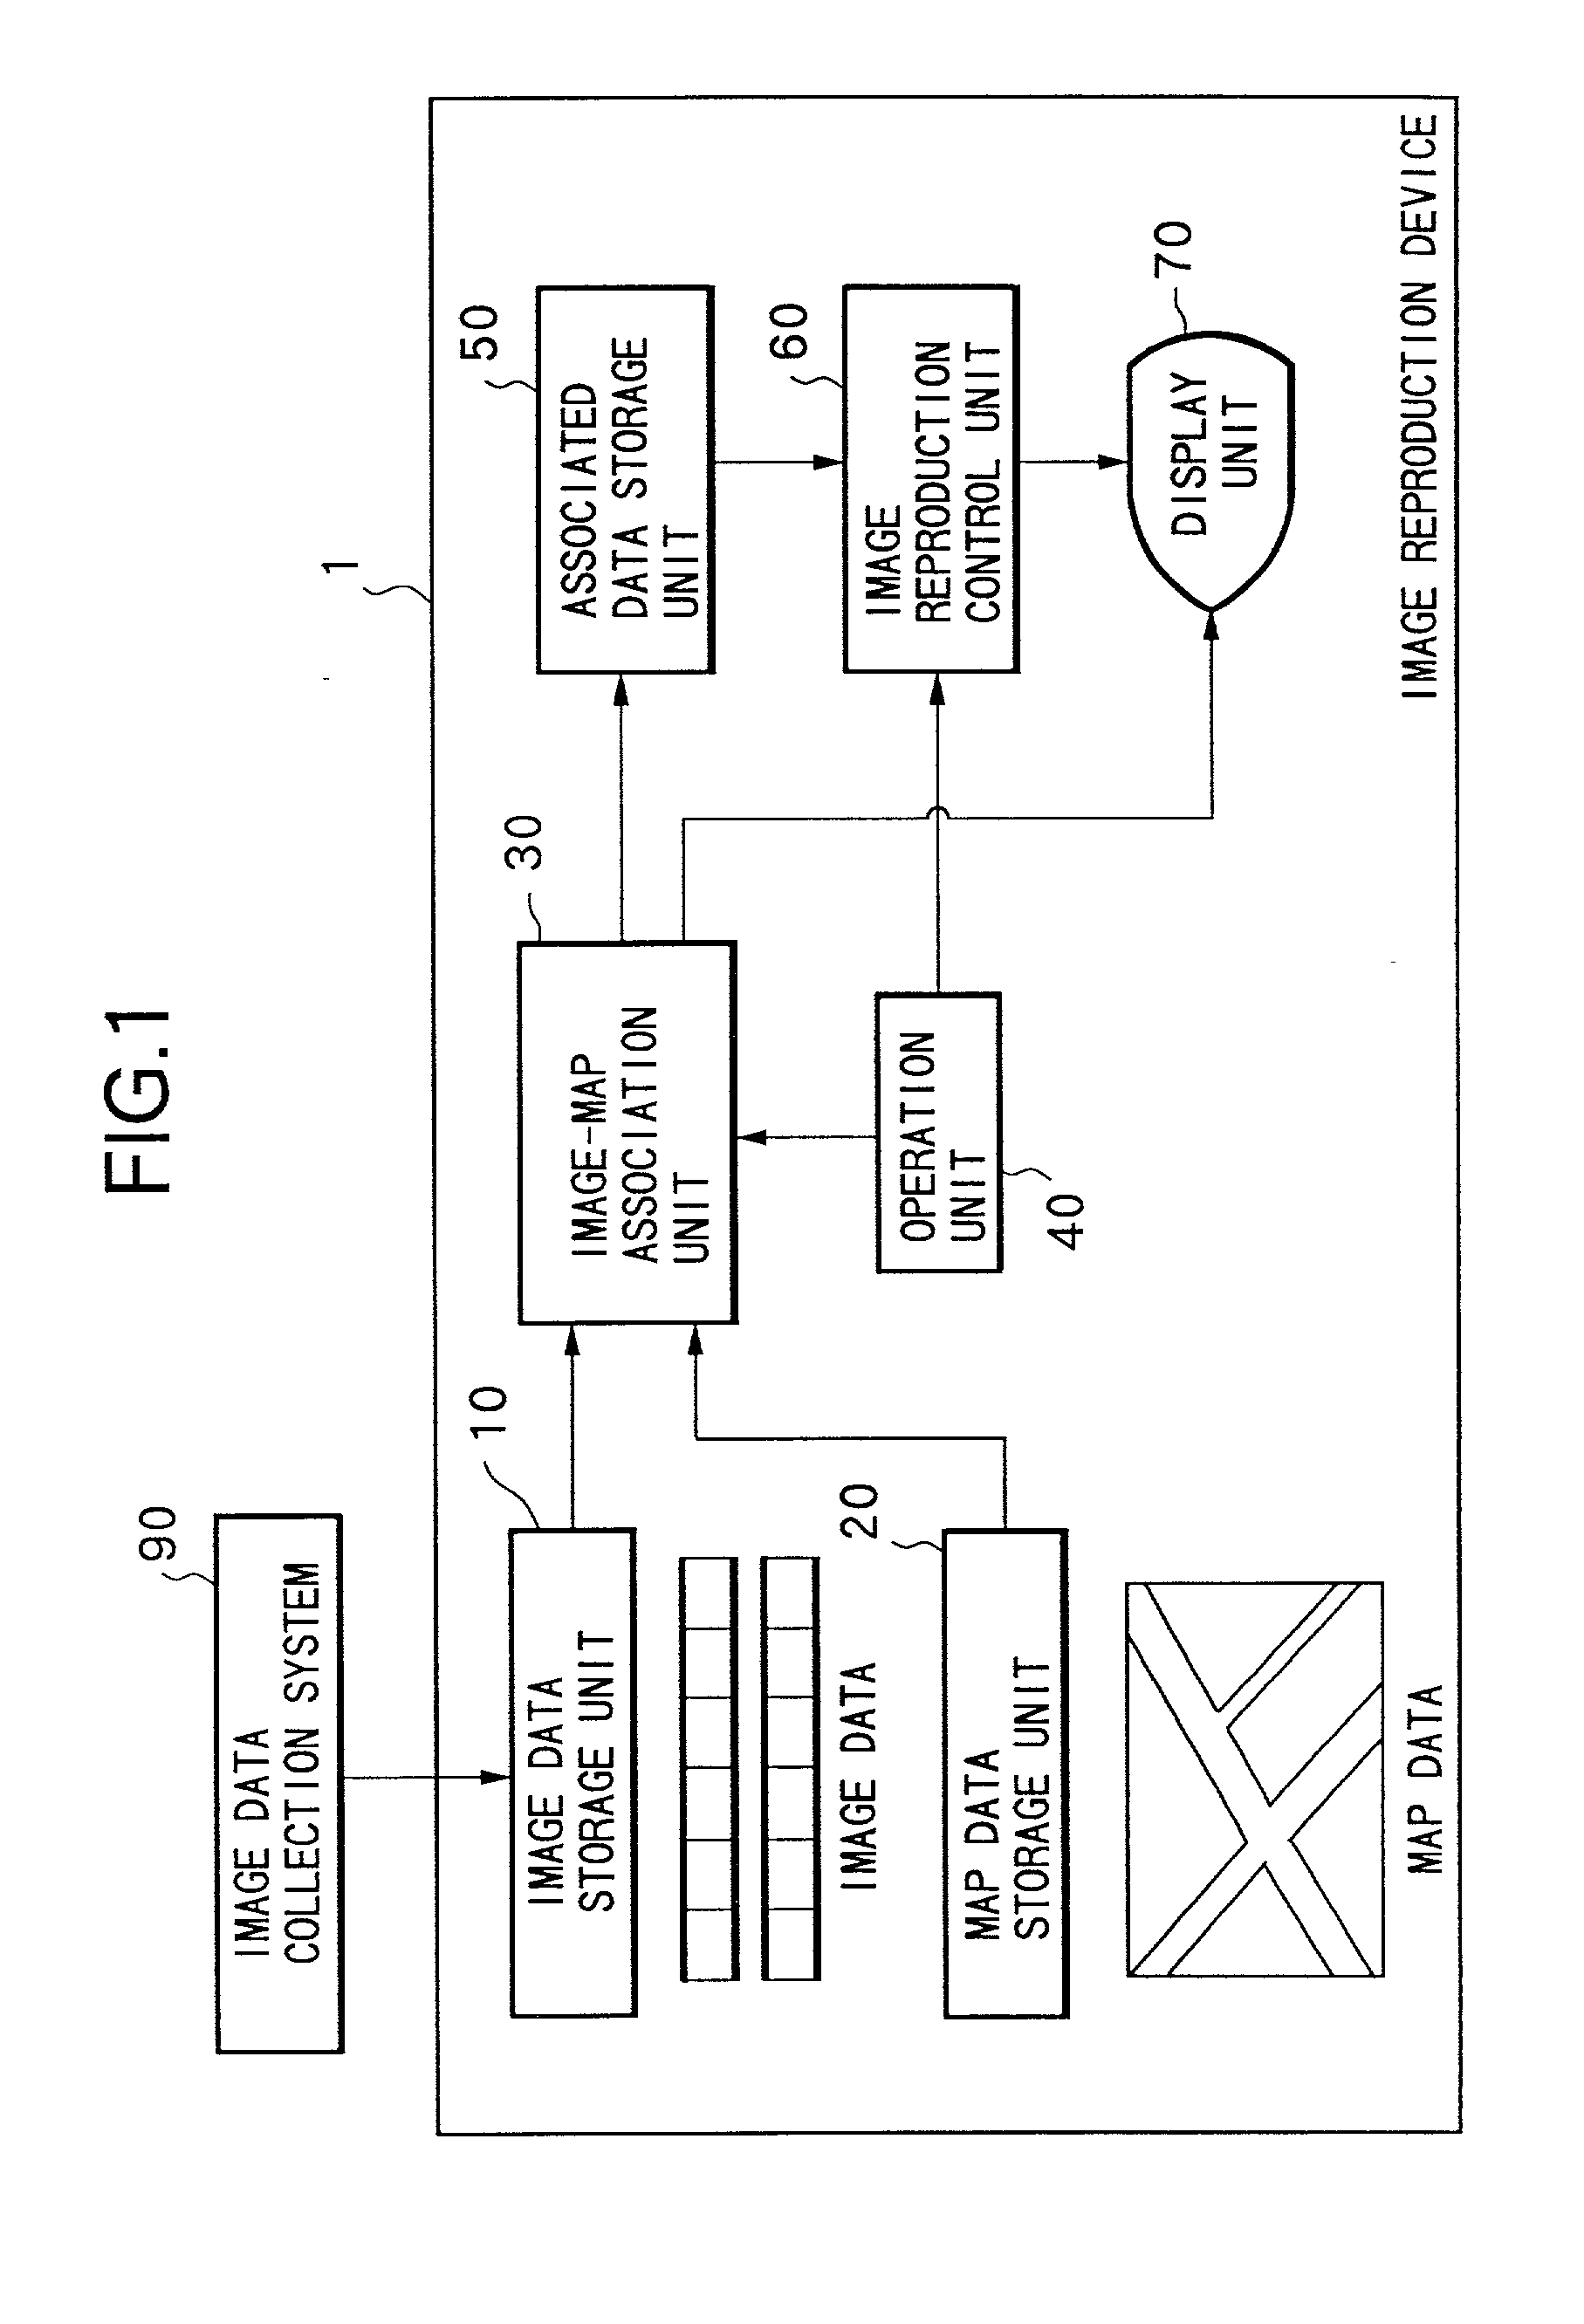 Image reproduction apparatus, image processing apparatus, and method therefor